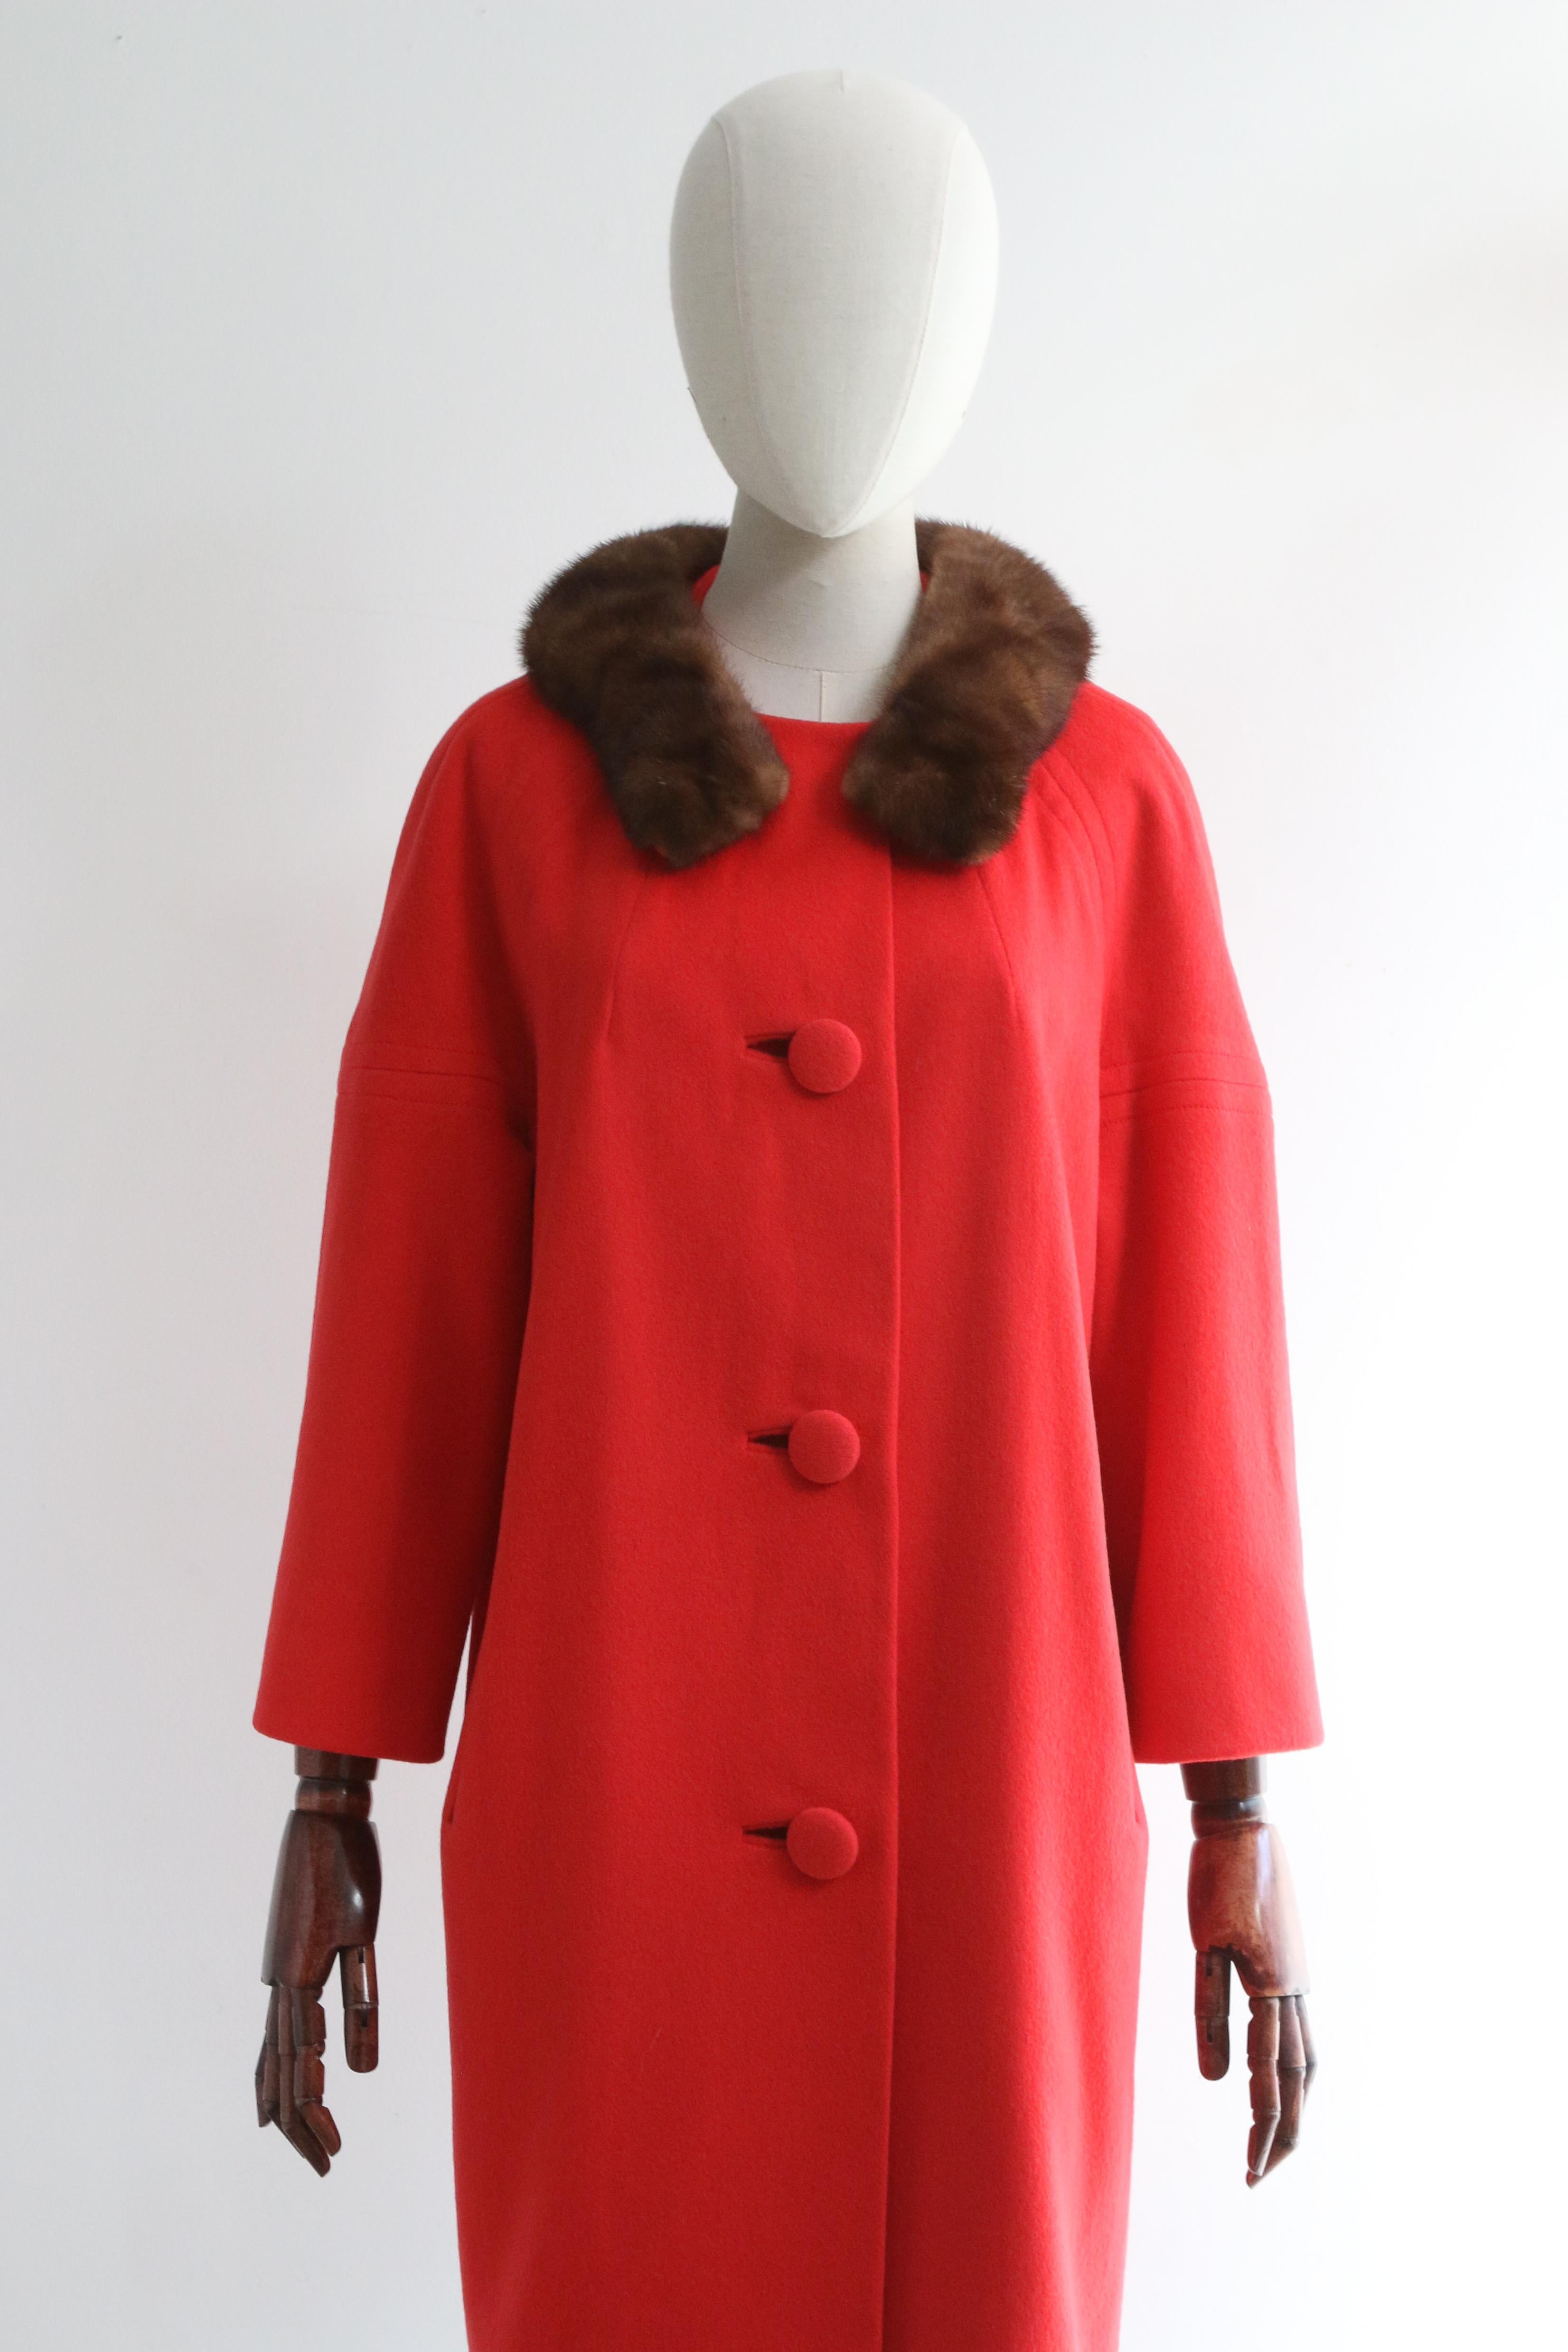 This wonderfully bright 1960's Lilli Ann coat in a vibrant shade of big apple red wool, finished with a chocolate brown mink fur collar, is the perfect piece to welcome the new season with.

The rounded neckline is framed by an elegant brown mink